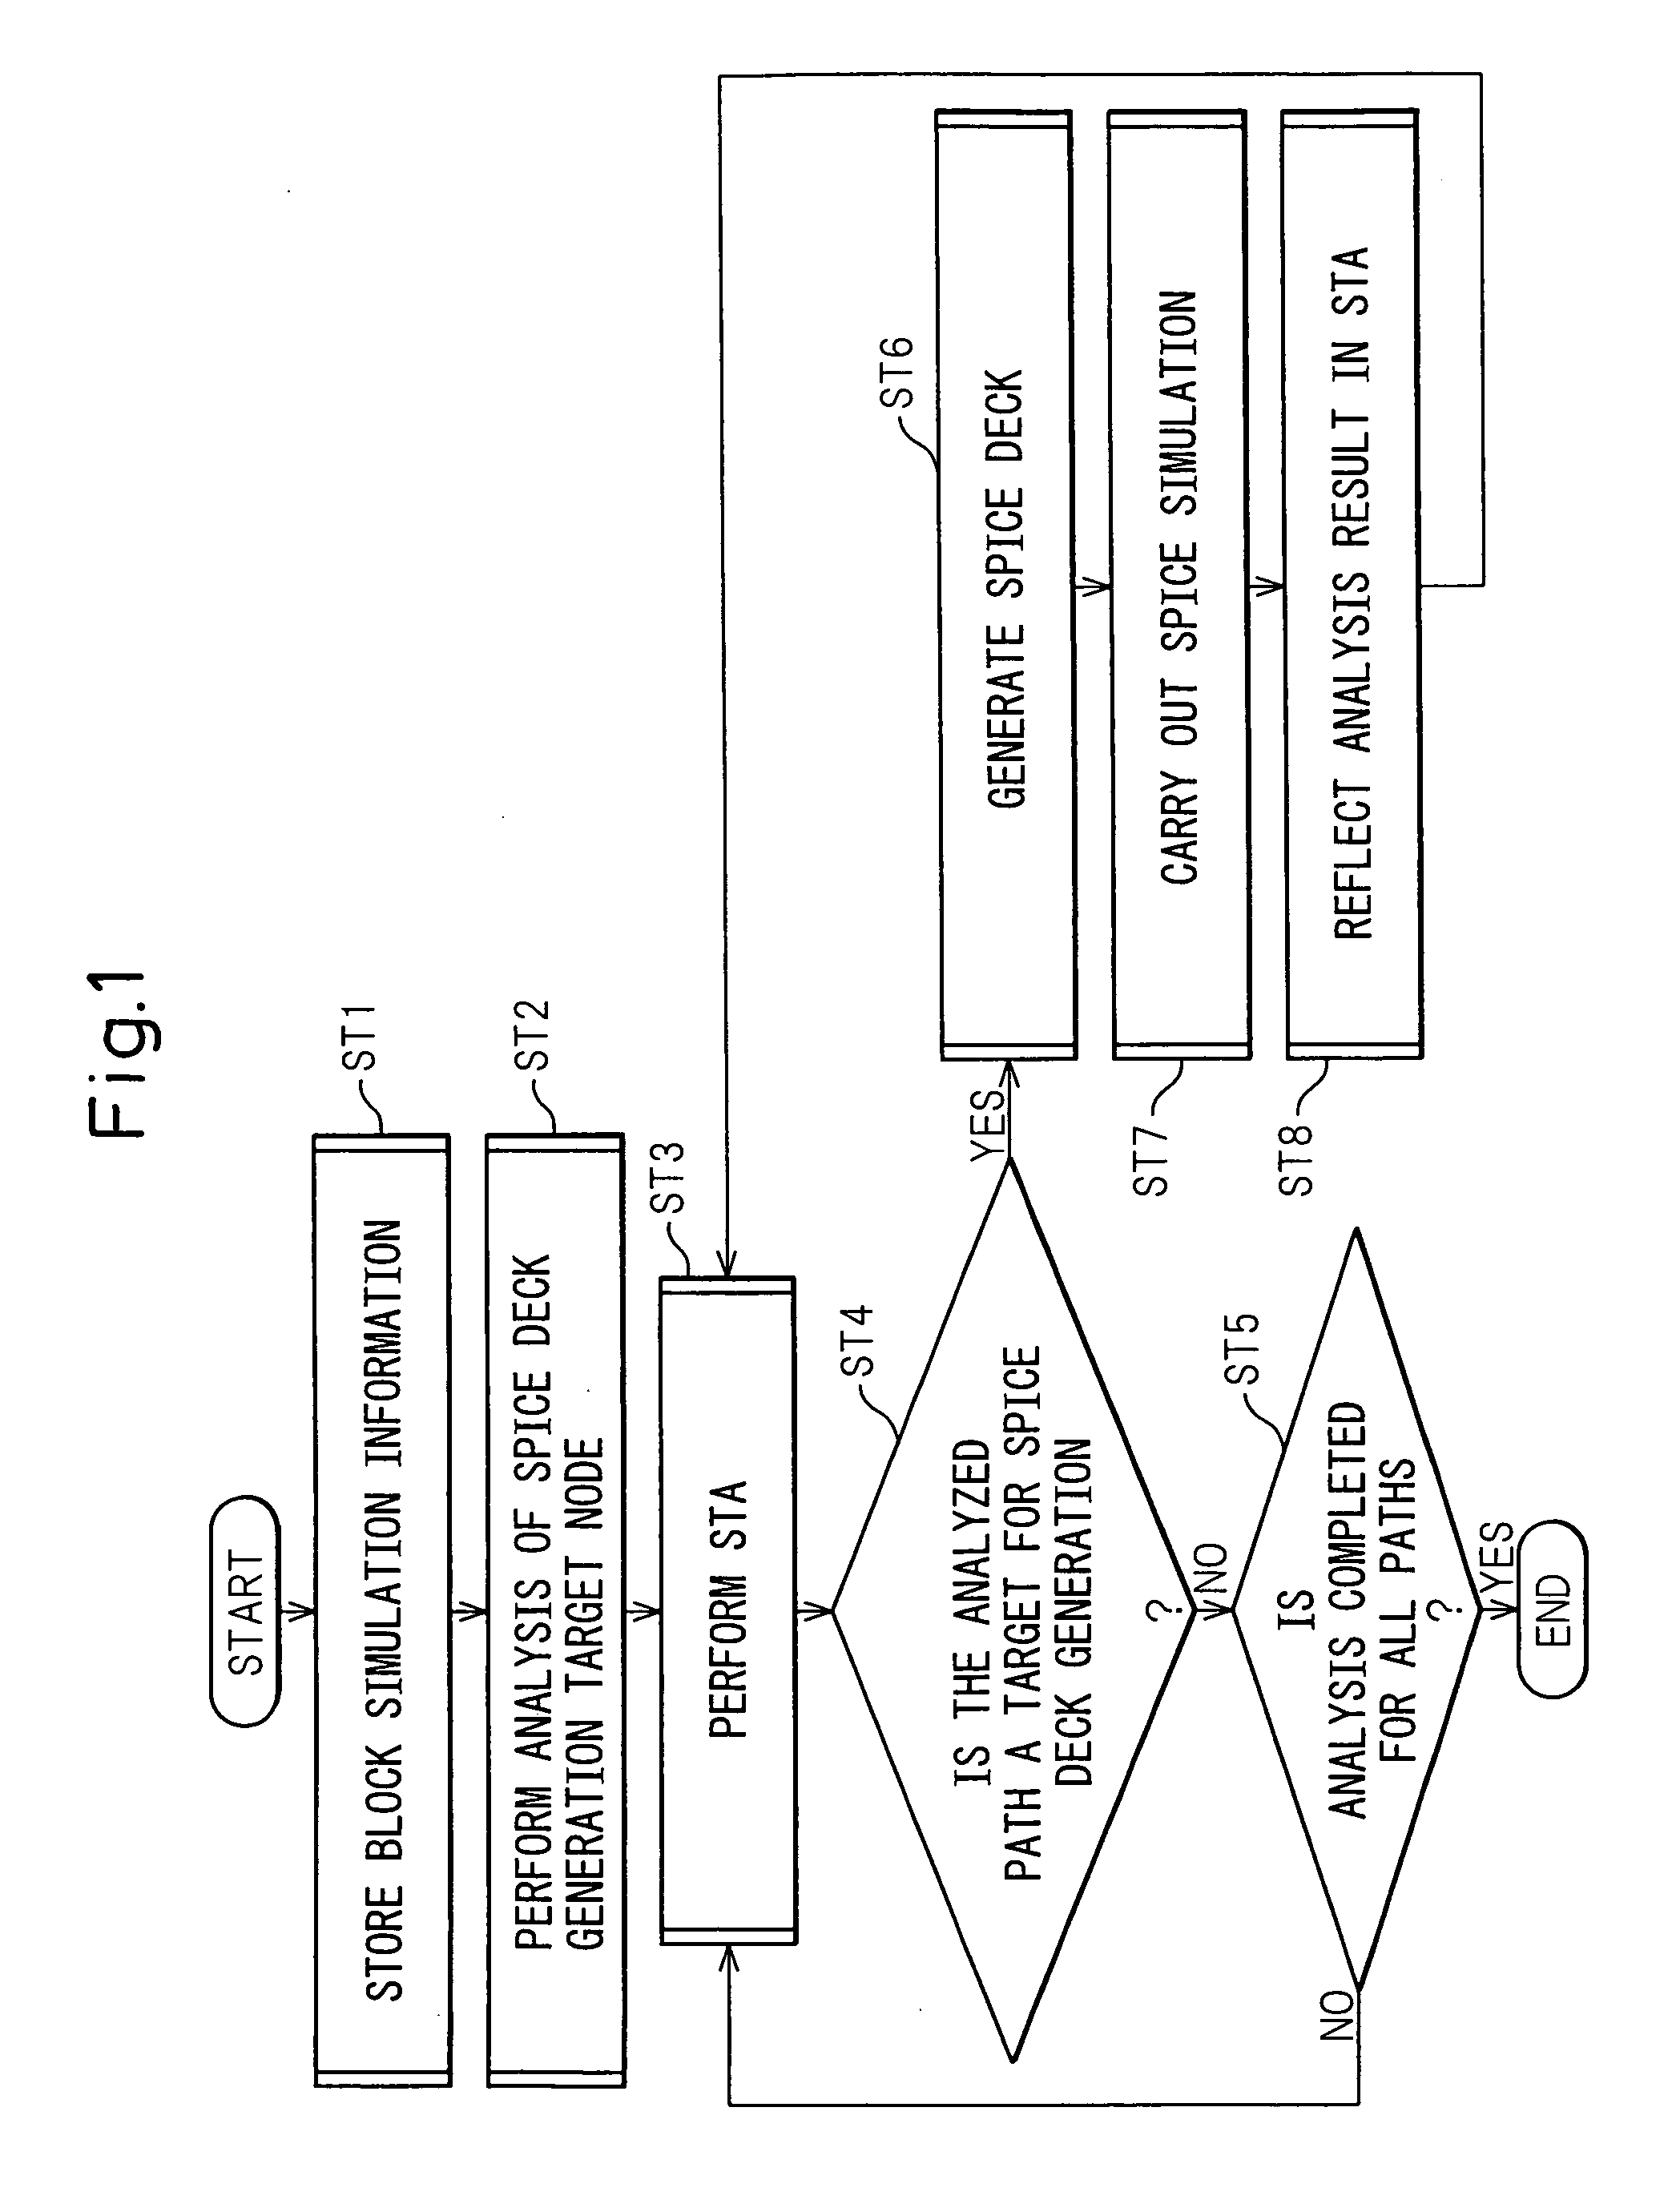 Timing analysis method and apparatus for enhancing accuracy of timing analysis and improving work efficiency thereof